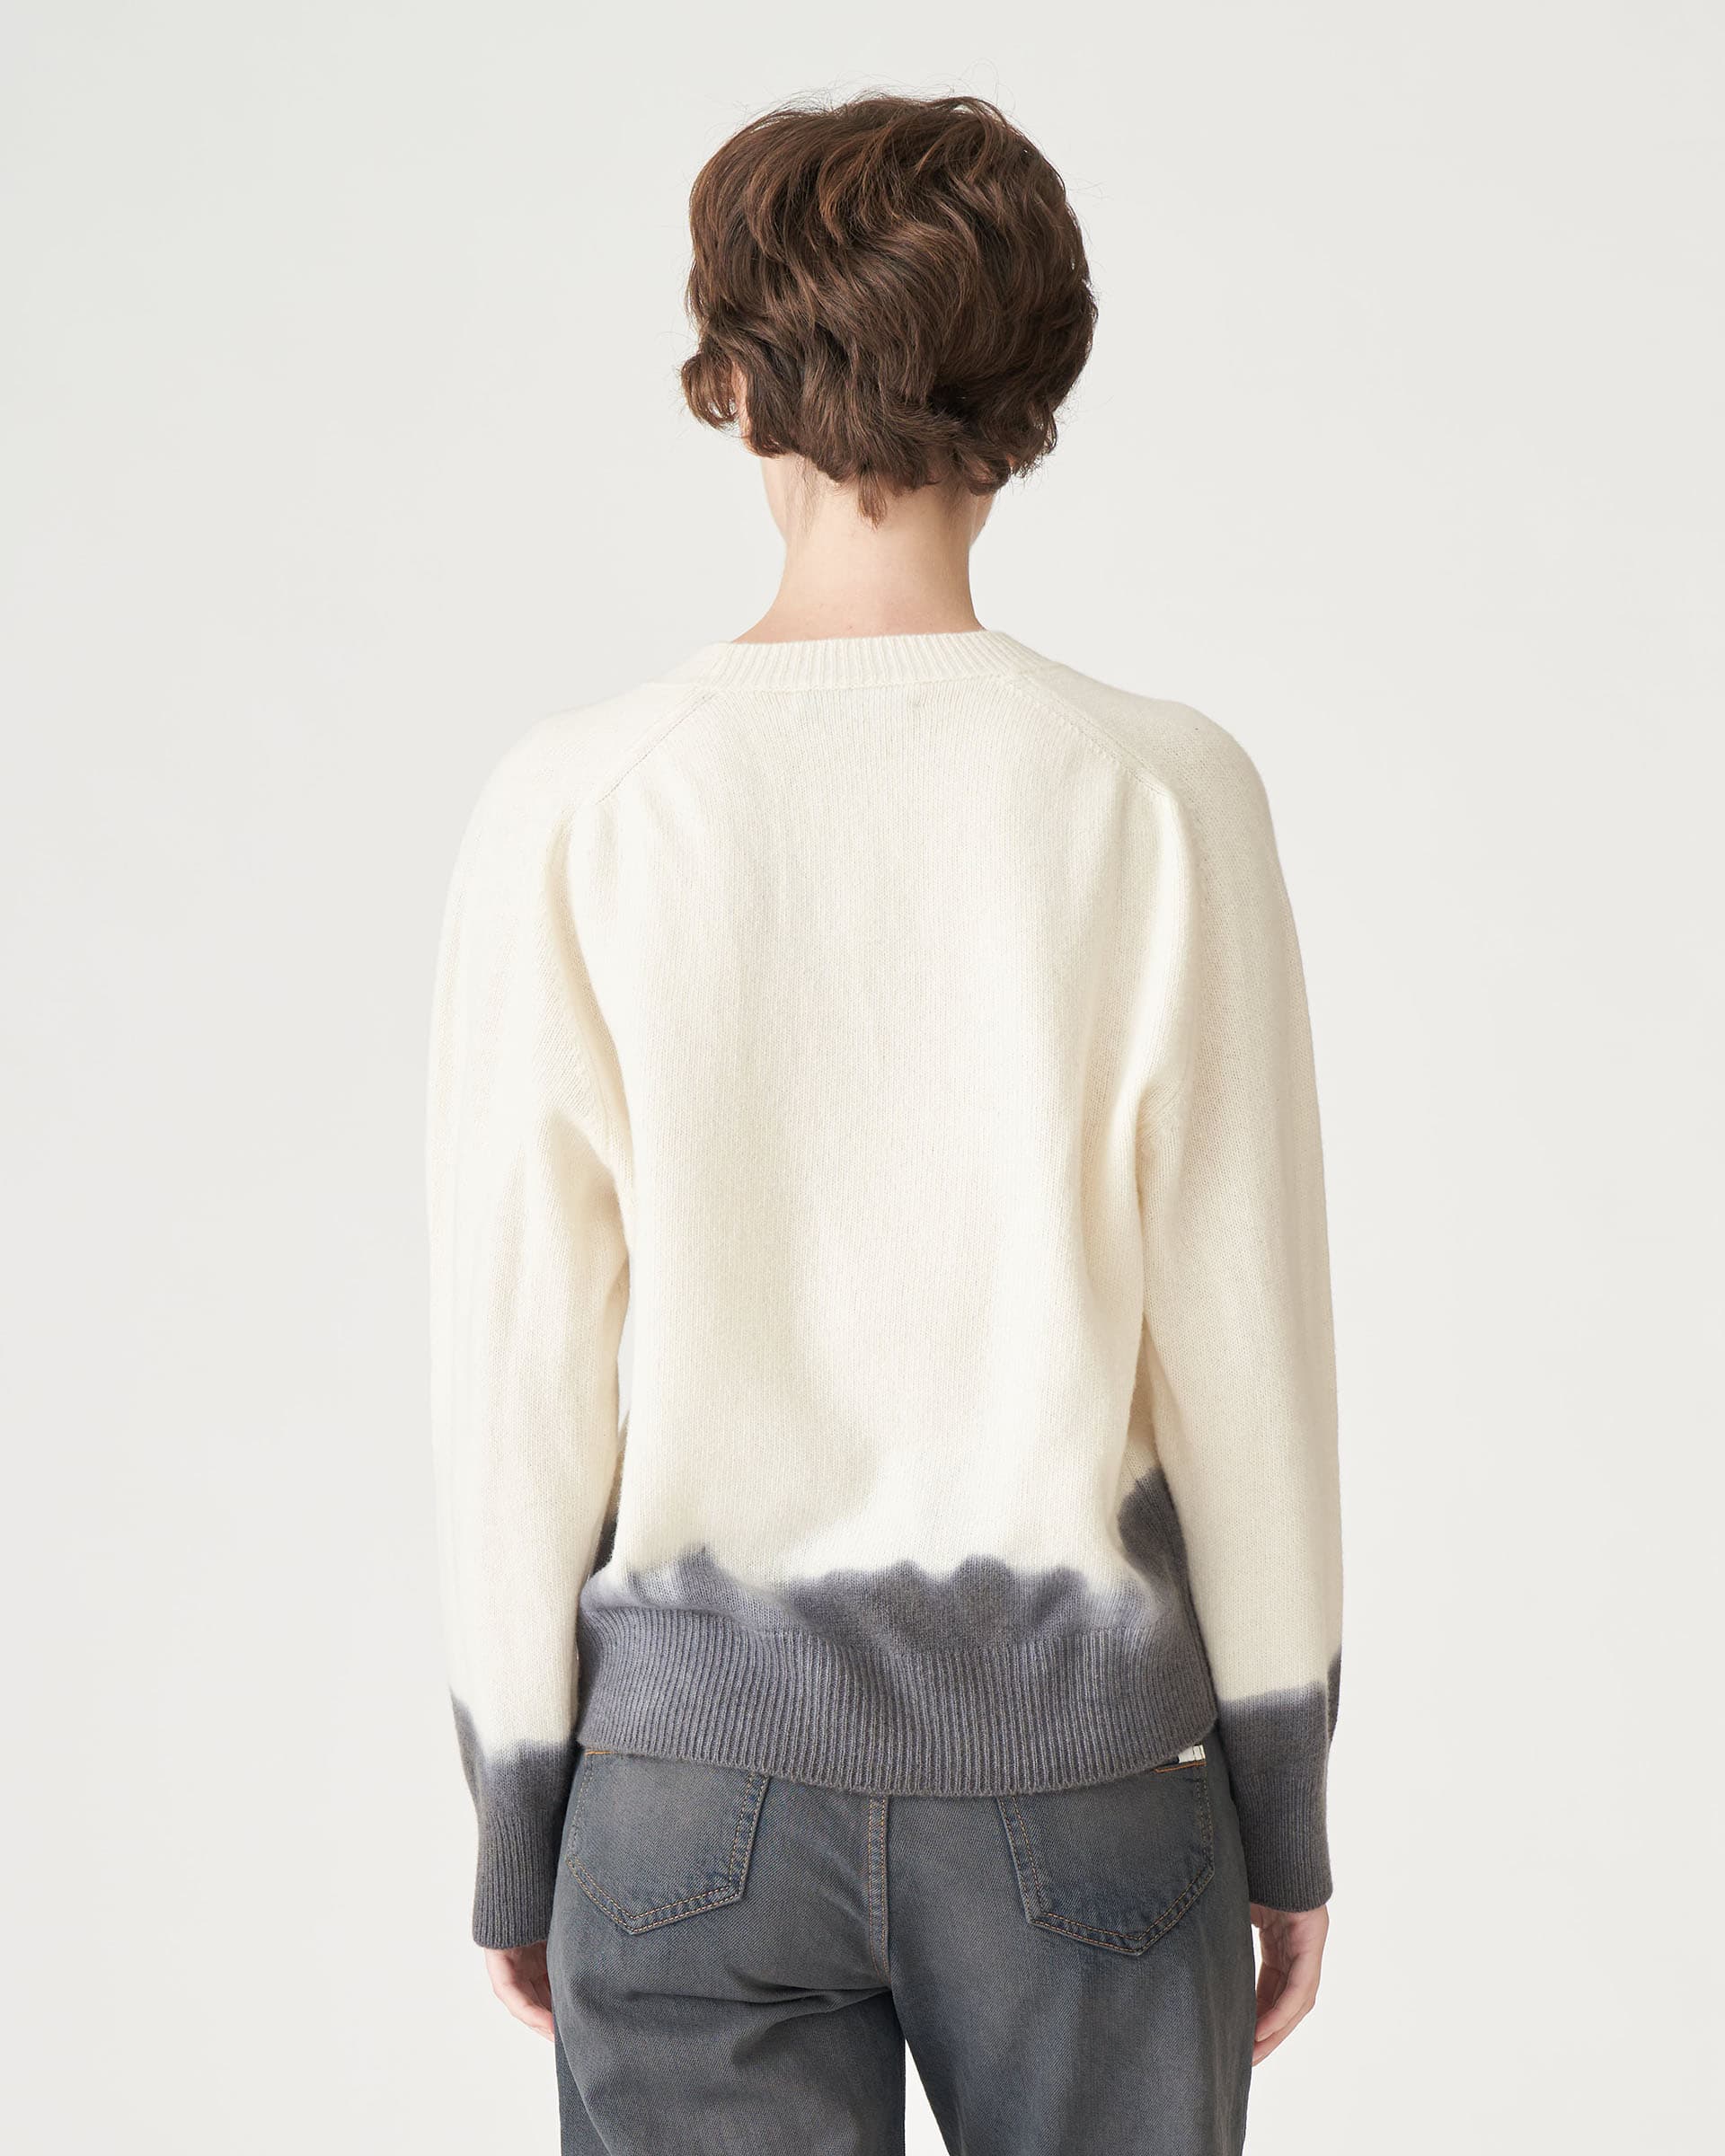 The Market Store | Crewneck Sweater With Dirt